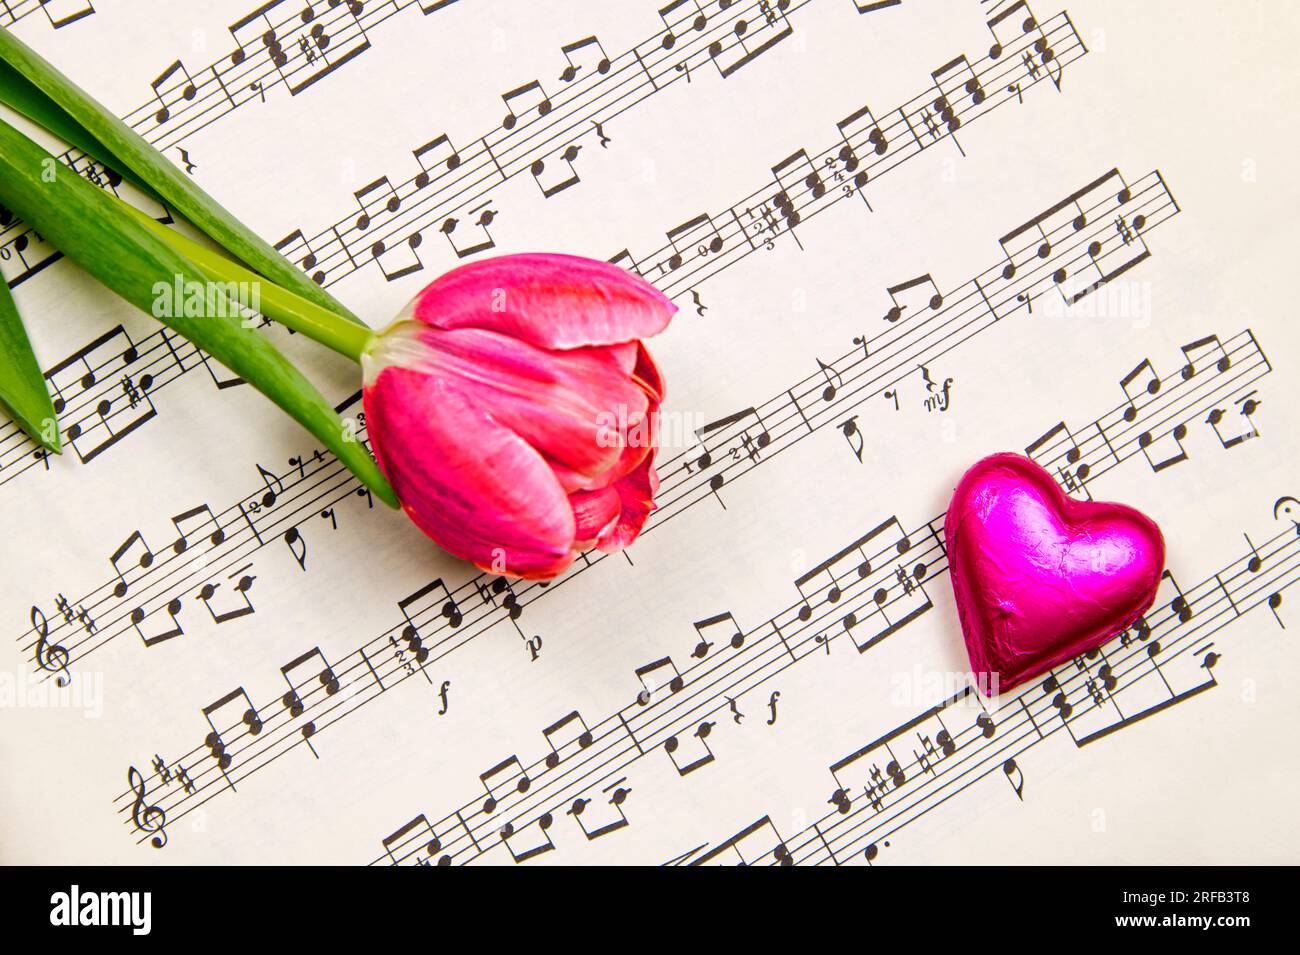 Music, flowers and chocolate to express the love feelings Stock Photo